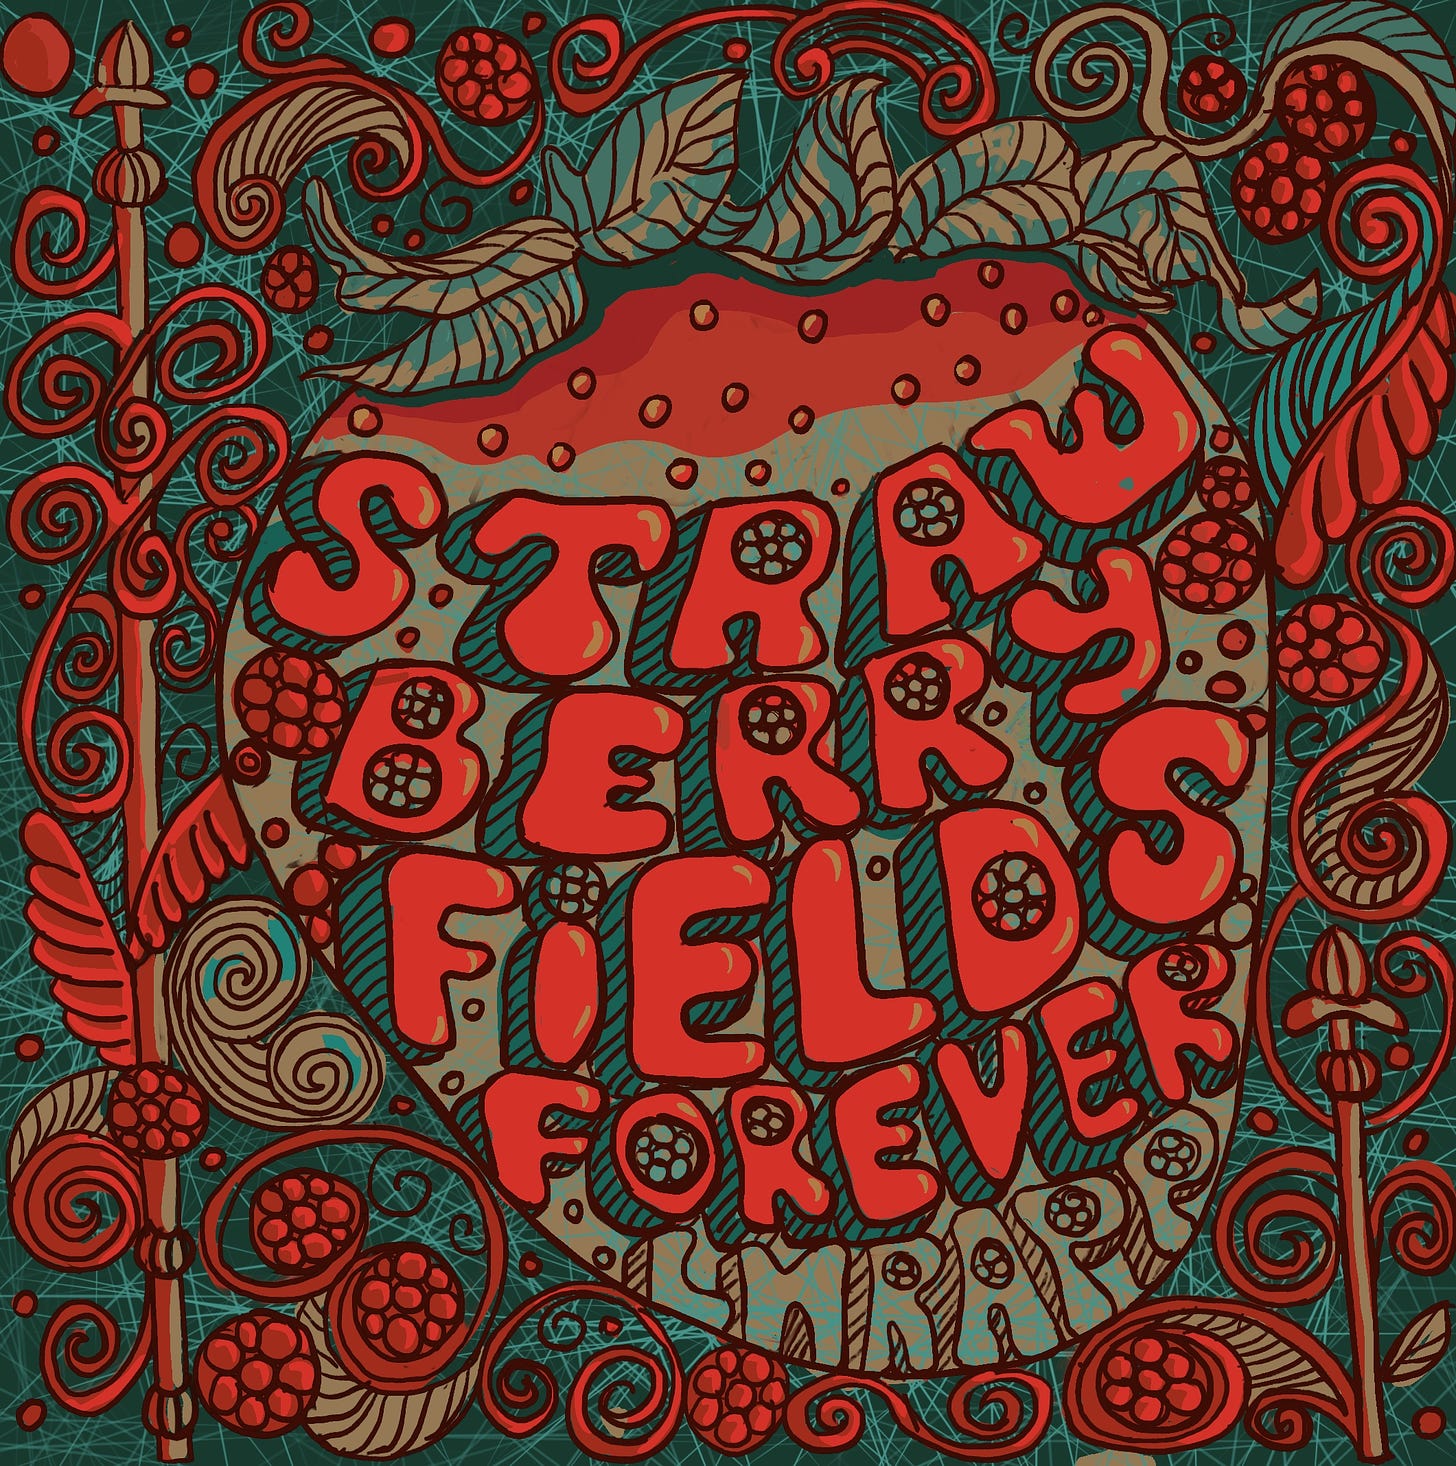 Illustration of Strawberry fields for ever